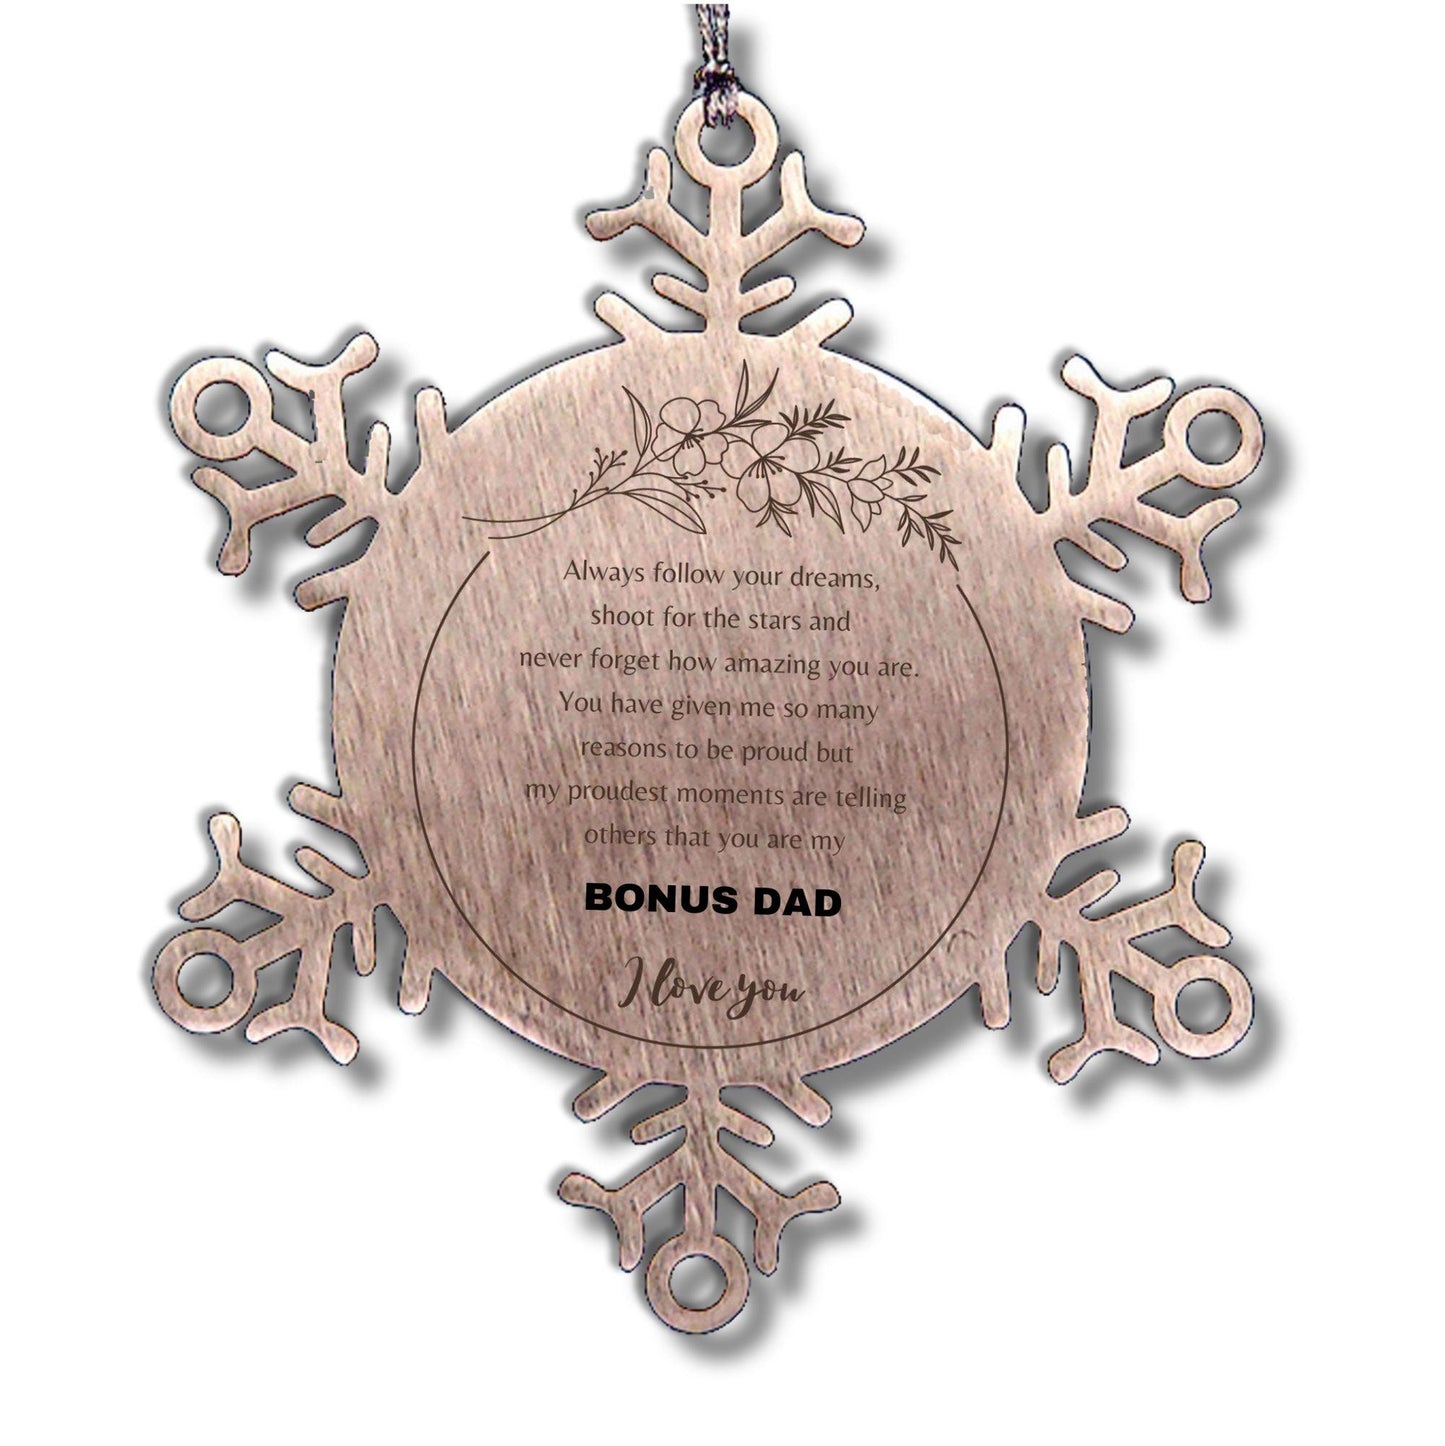 Bonus Dad Snowflake Stainless Steel Engraved Ornament Always follow your dreams, never forget how amazing you are, Birthday Christmas Gifts Jewelry - Mallard Moon Gift Shop